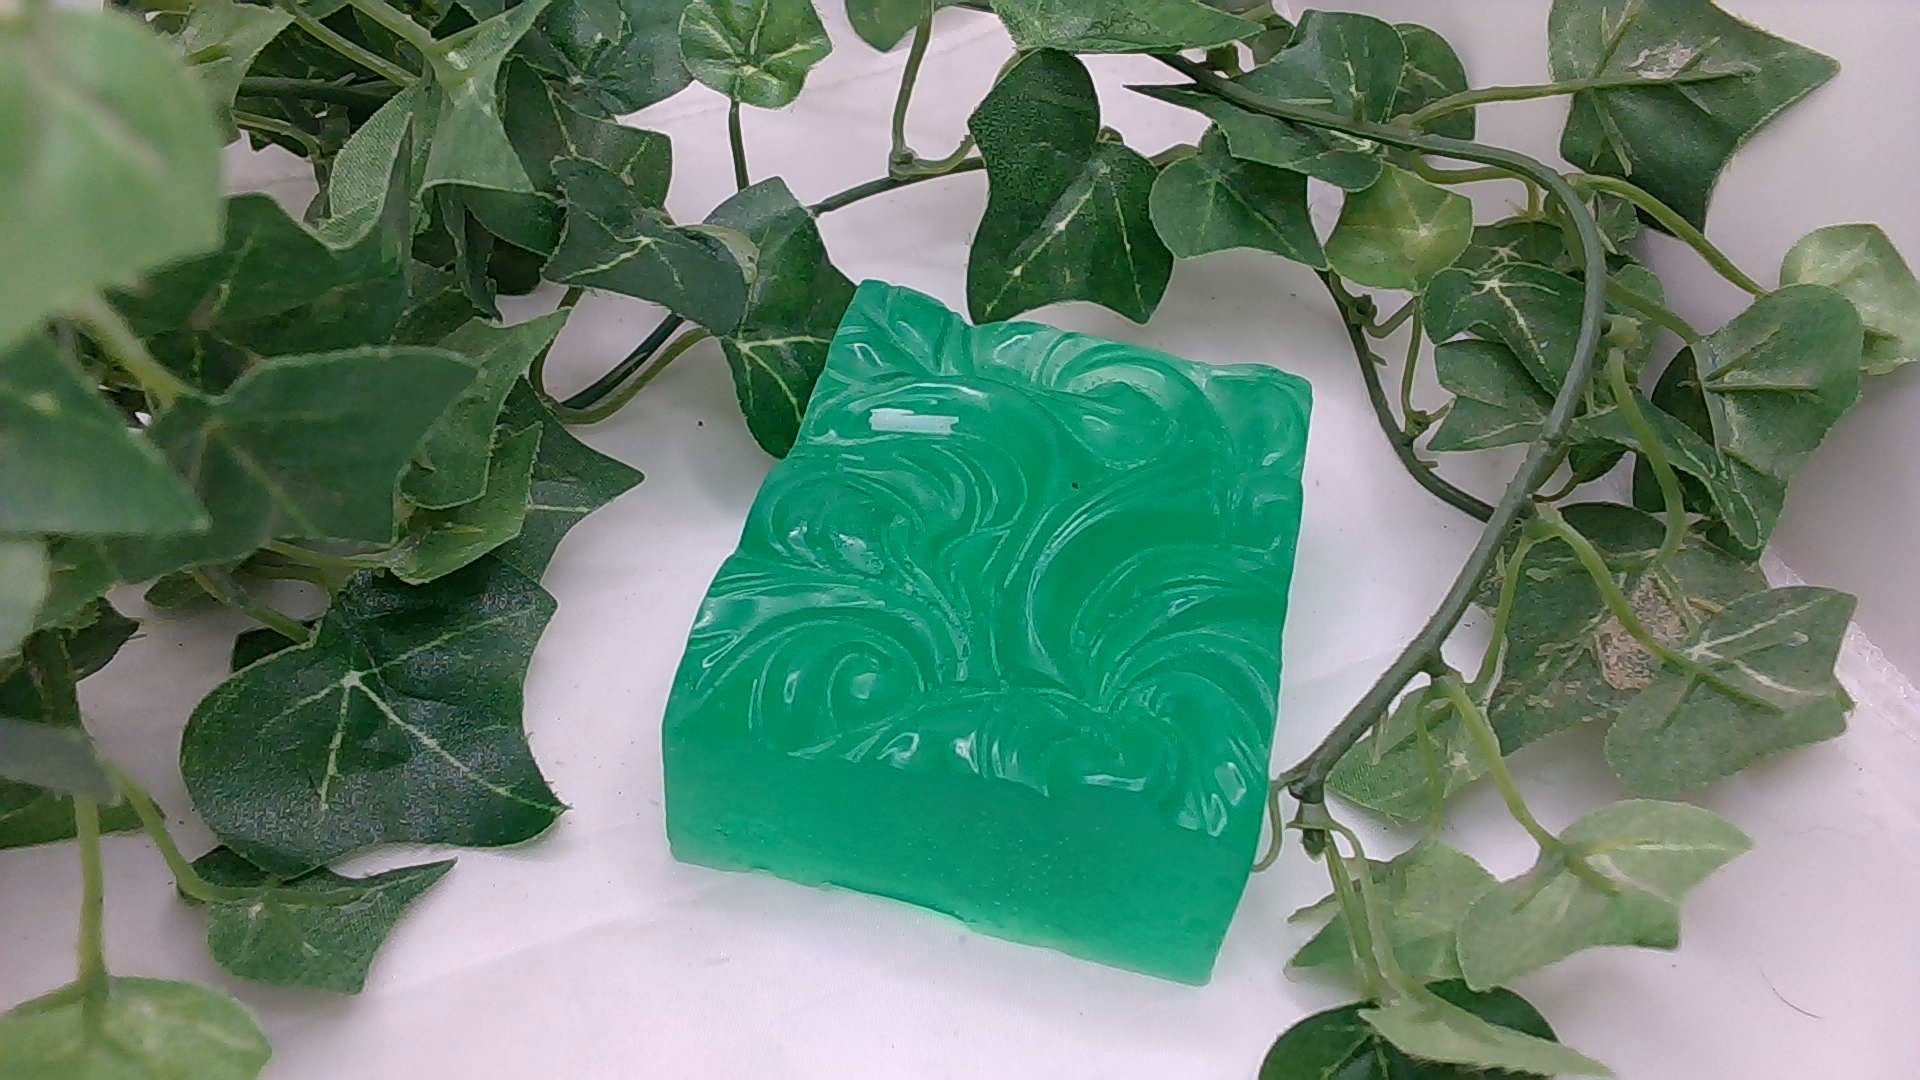 Lime and Aloe infused in Glycerin Soap